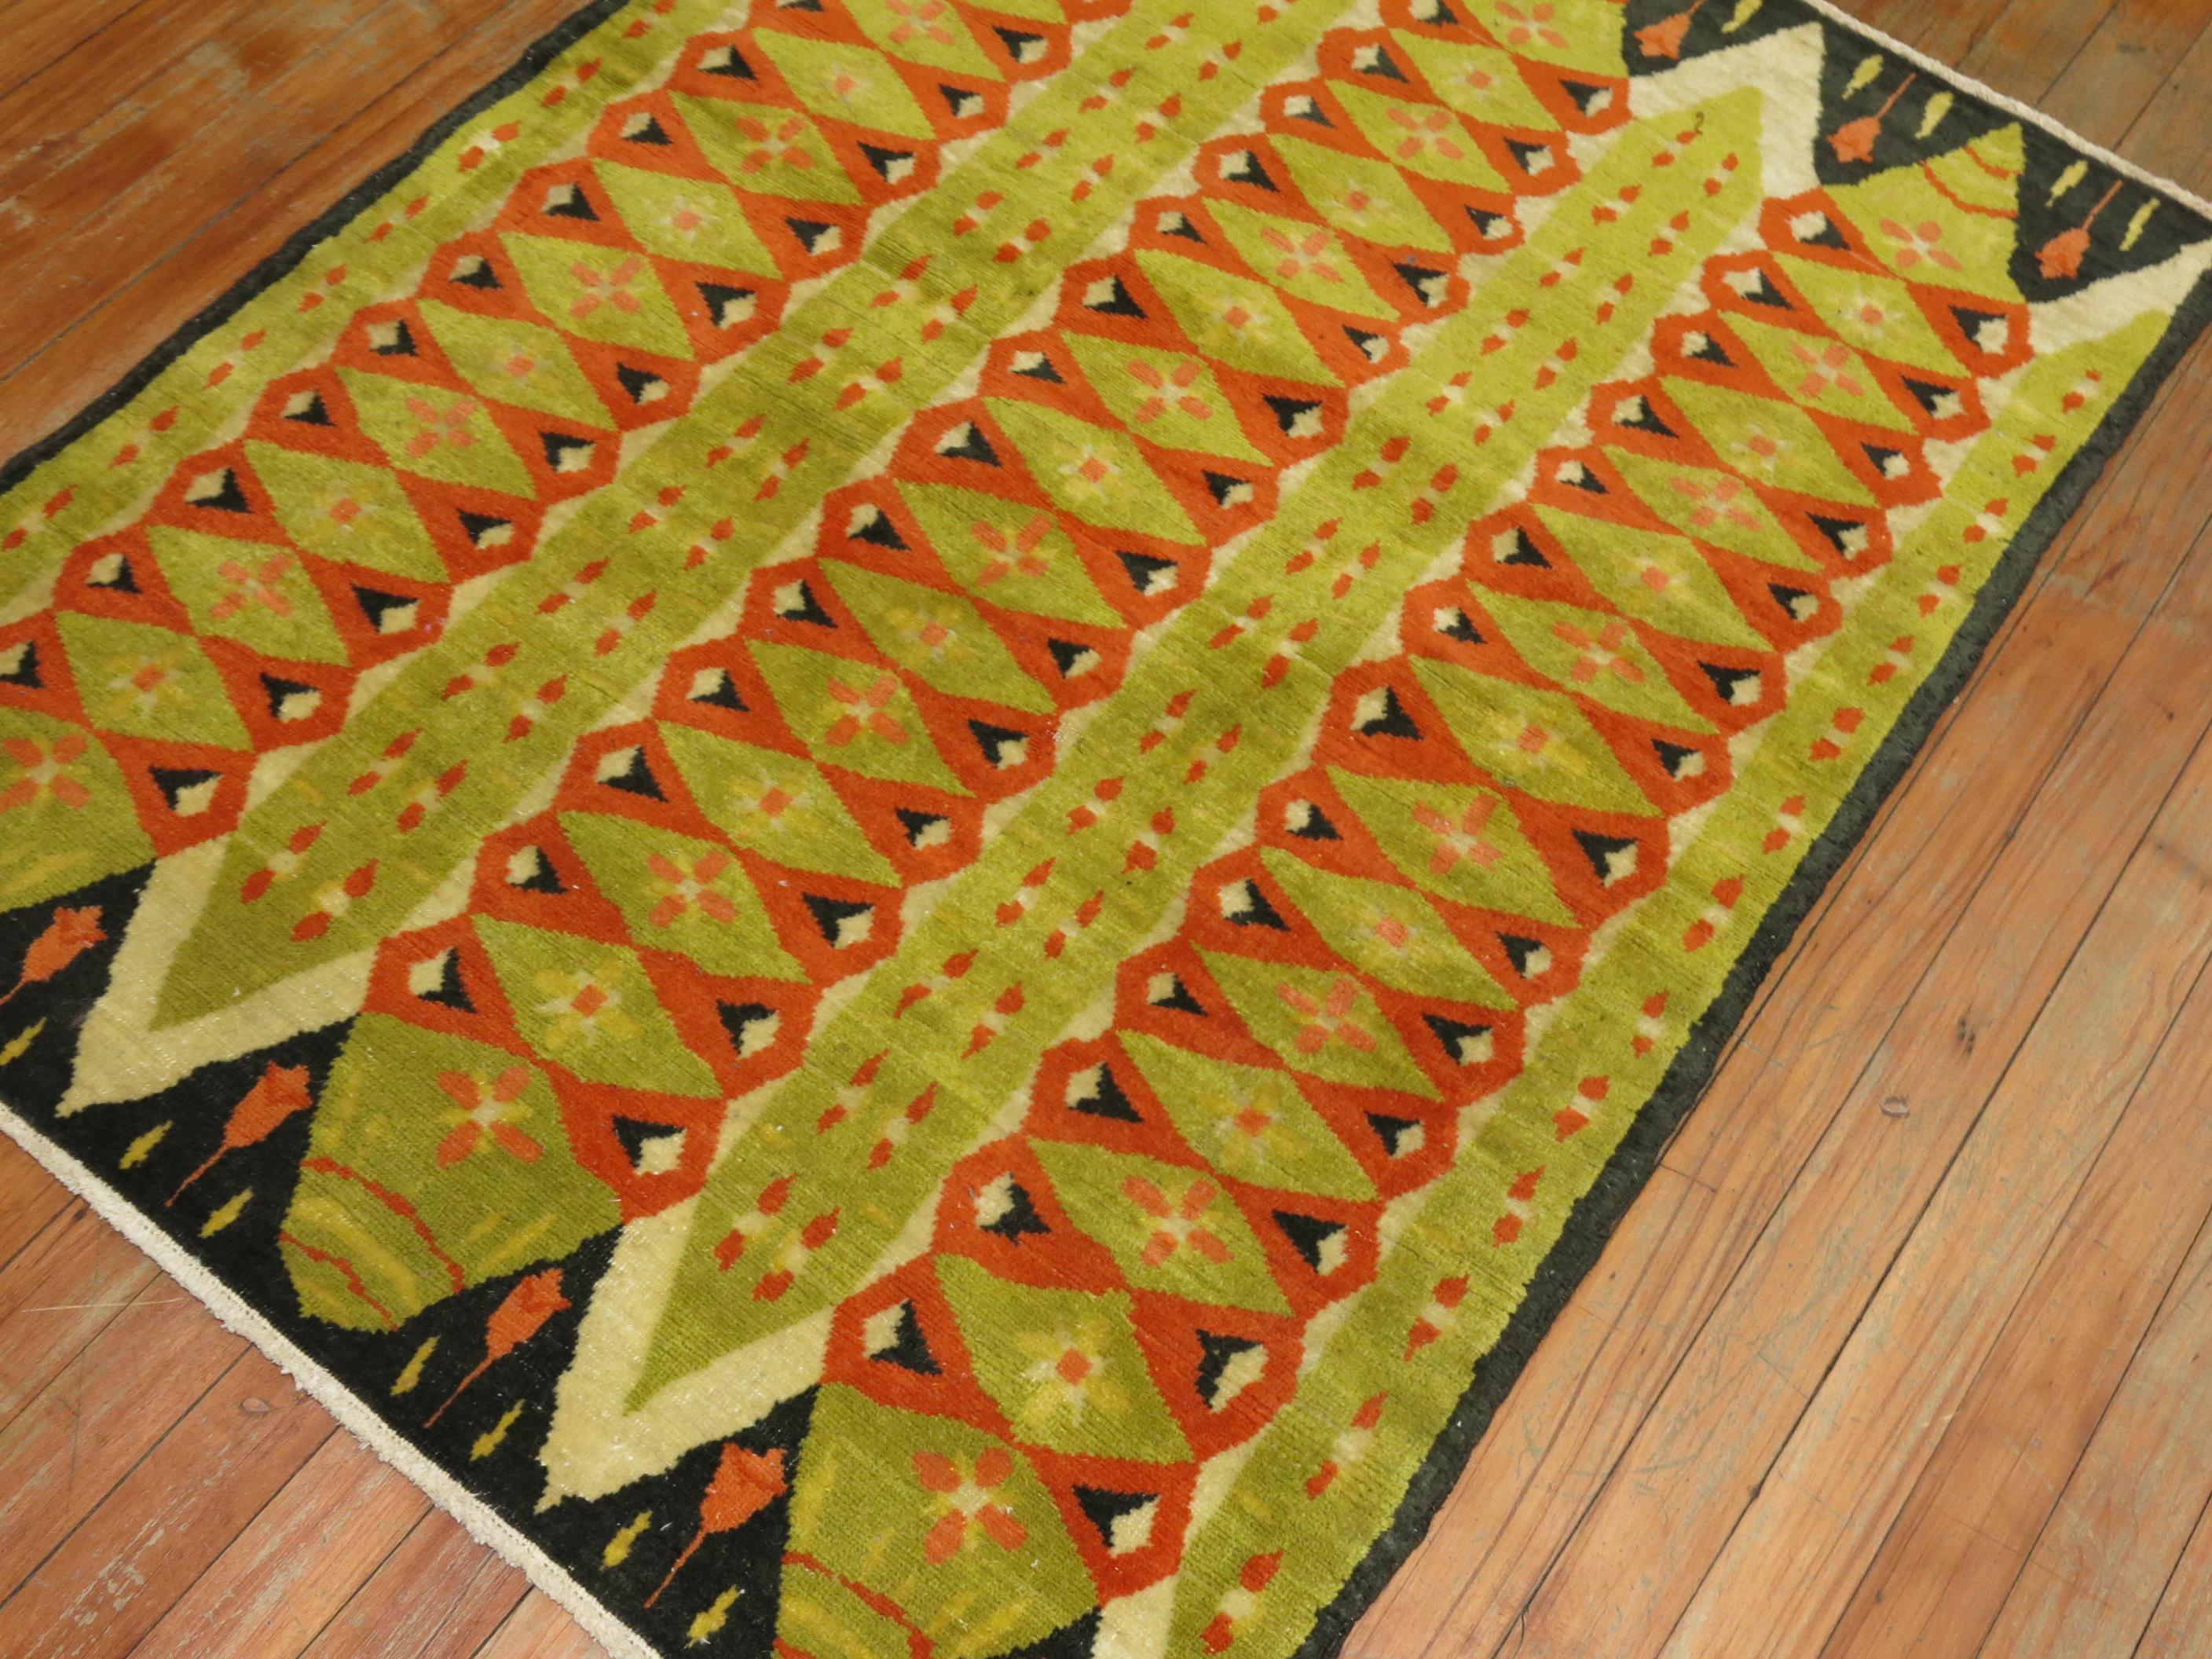 A one of a kind mid-20th century primitive and abstract Turkish Art Deco Inspired rug. The quality on this one seems finer than its predecessors. The condition is great too. Might make a great wall piece too,

circa mid-20th century. Measures: